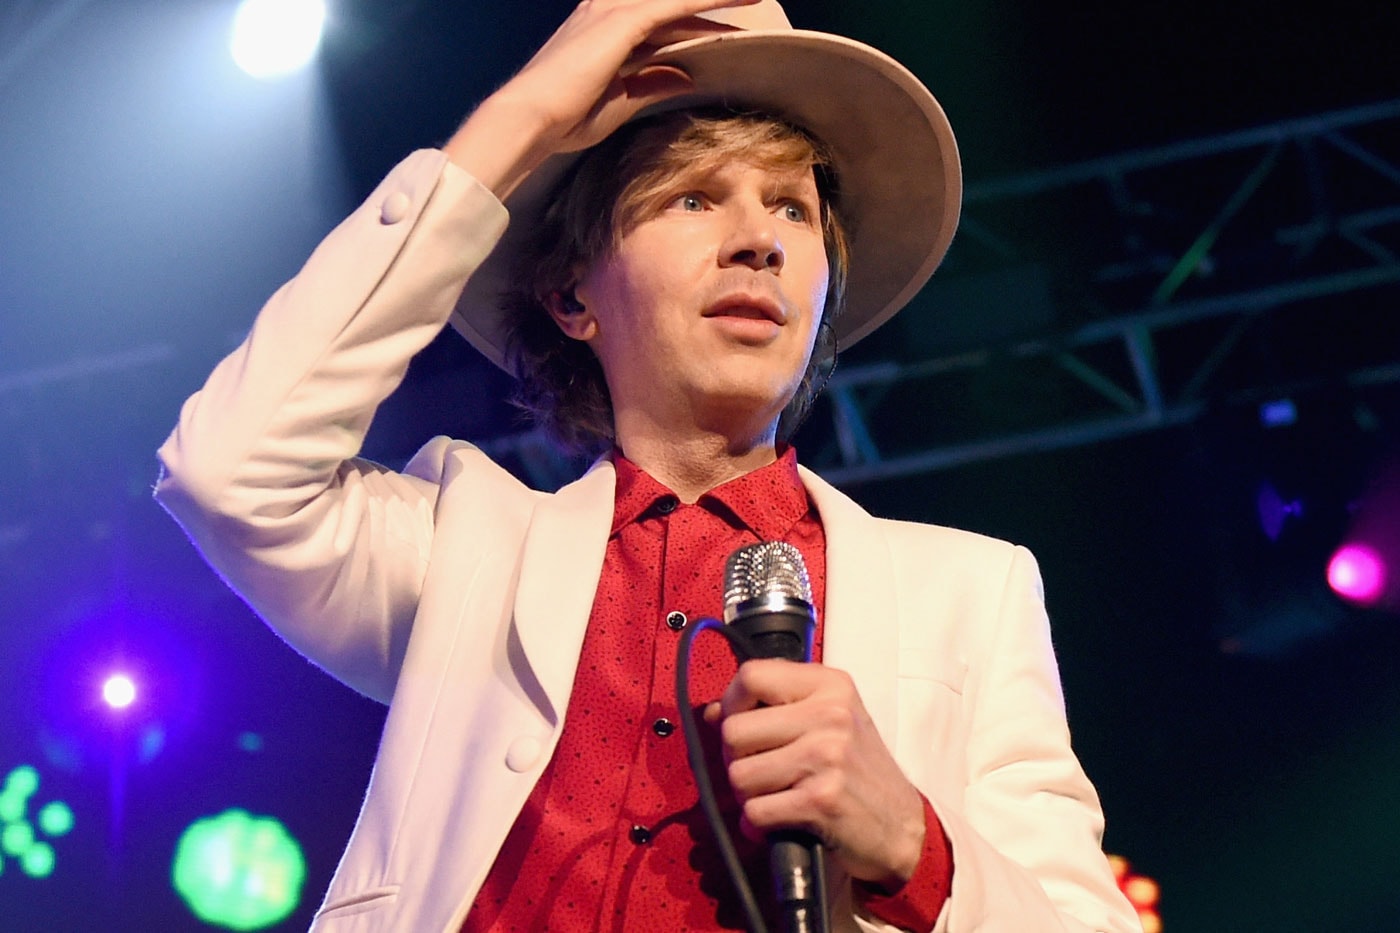 Watch Beck's New Video for "Wow"